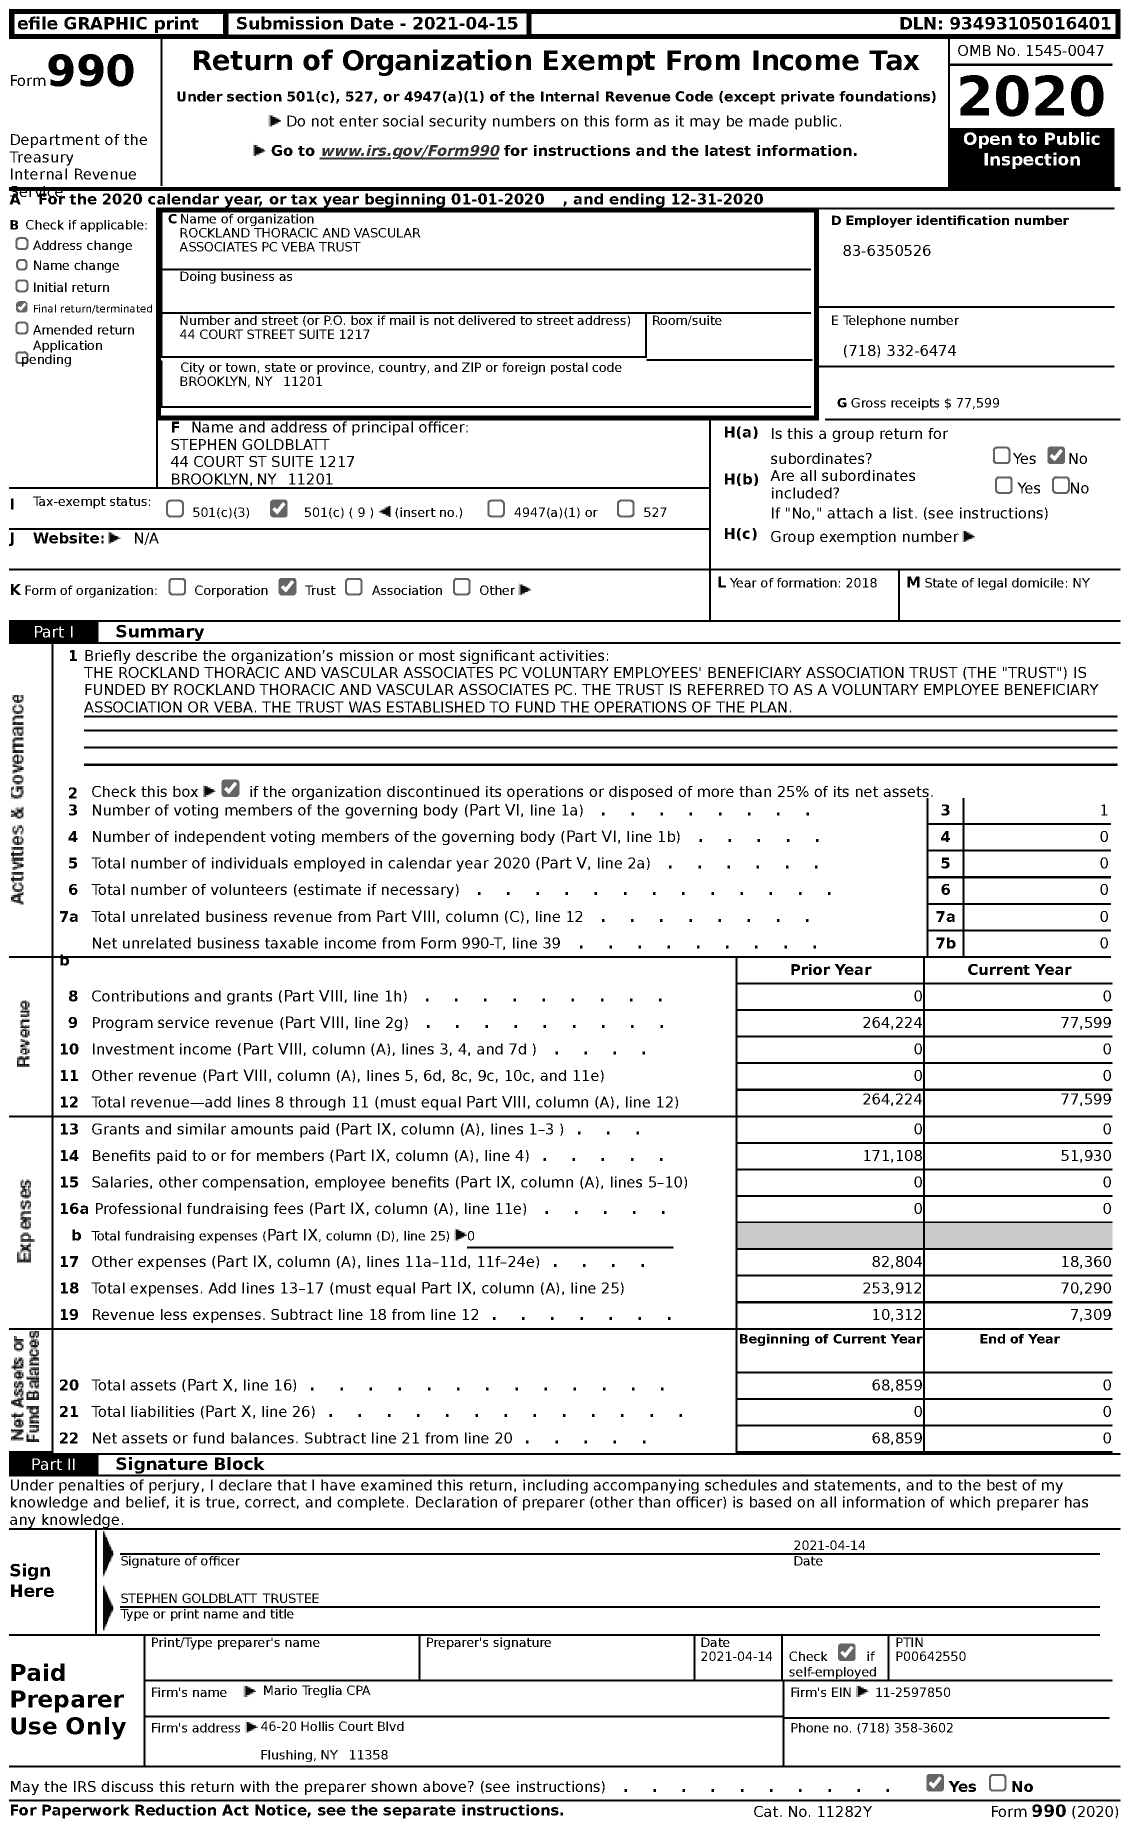 Image of first page of 2020 Form 990 for Rockland Thoracic and Vascular Associates PC Veba Trust